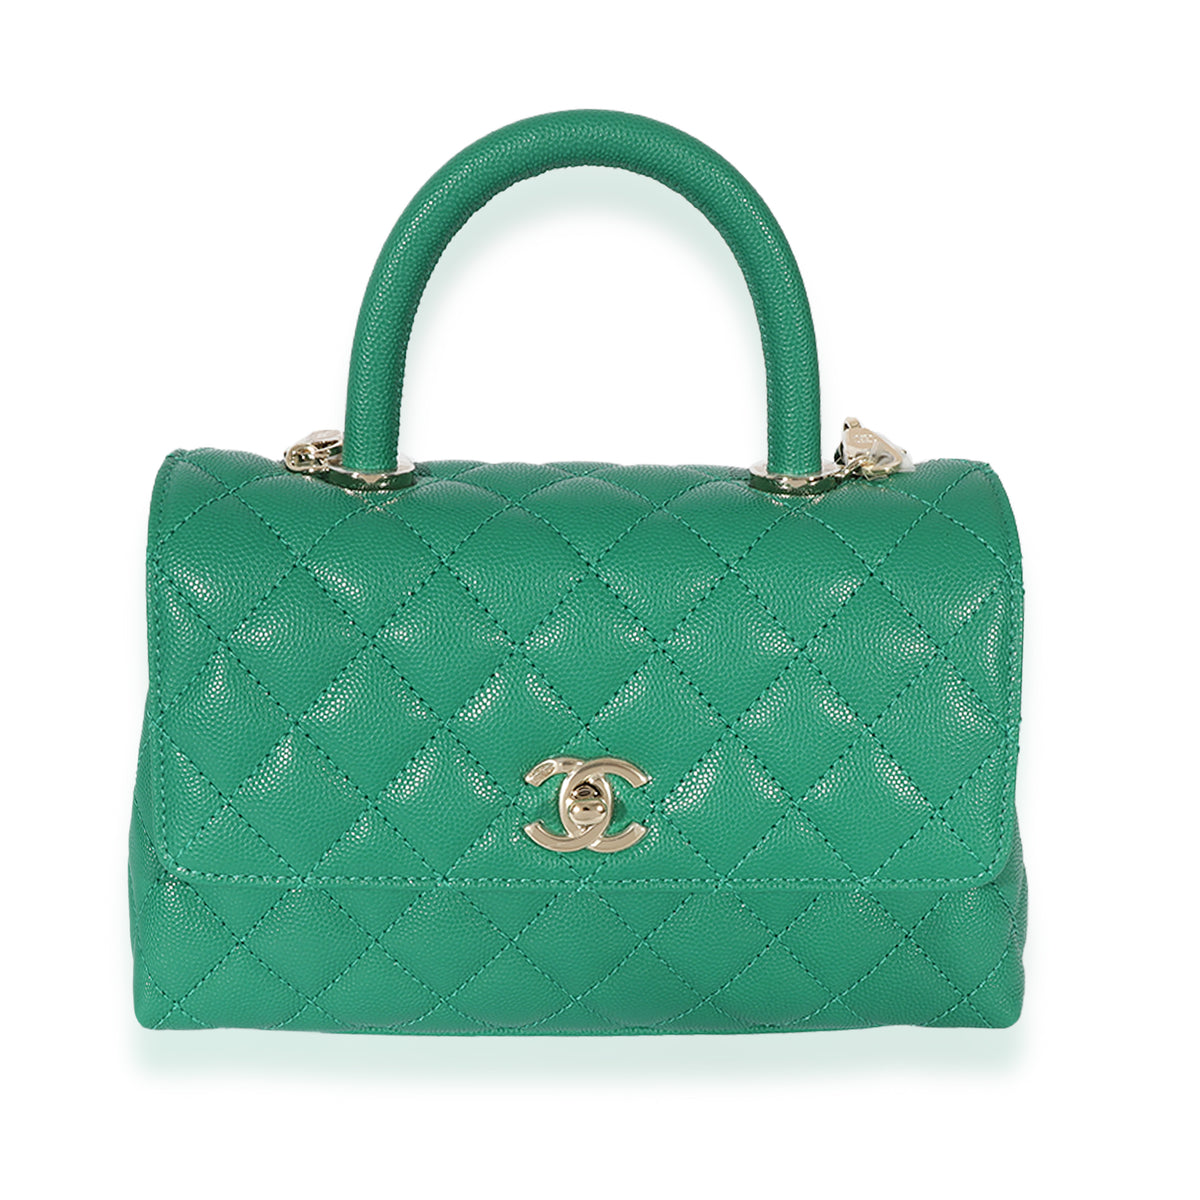 Chanel 22A Green Quilted Caviar Mini Coco Top Handle Flap Bag